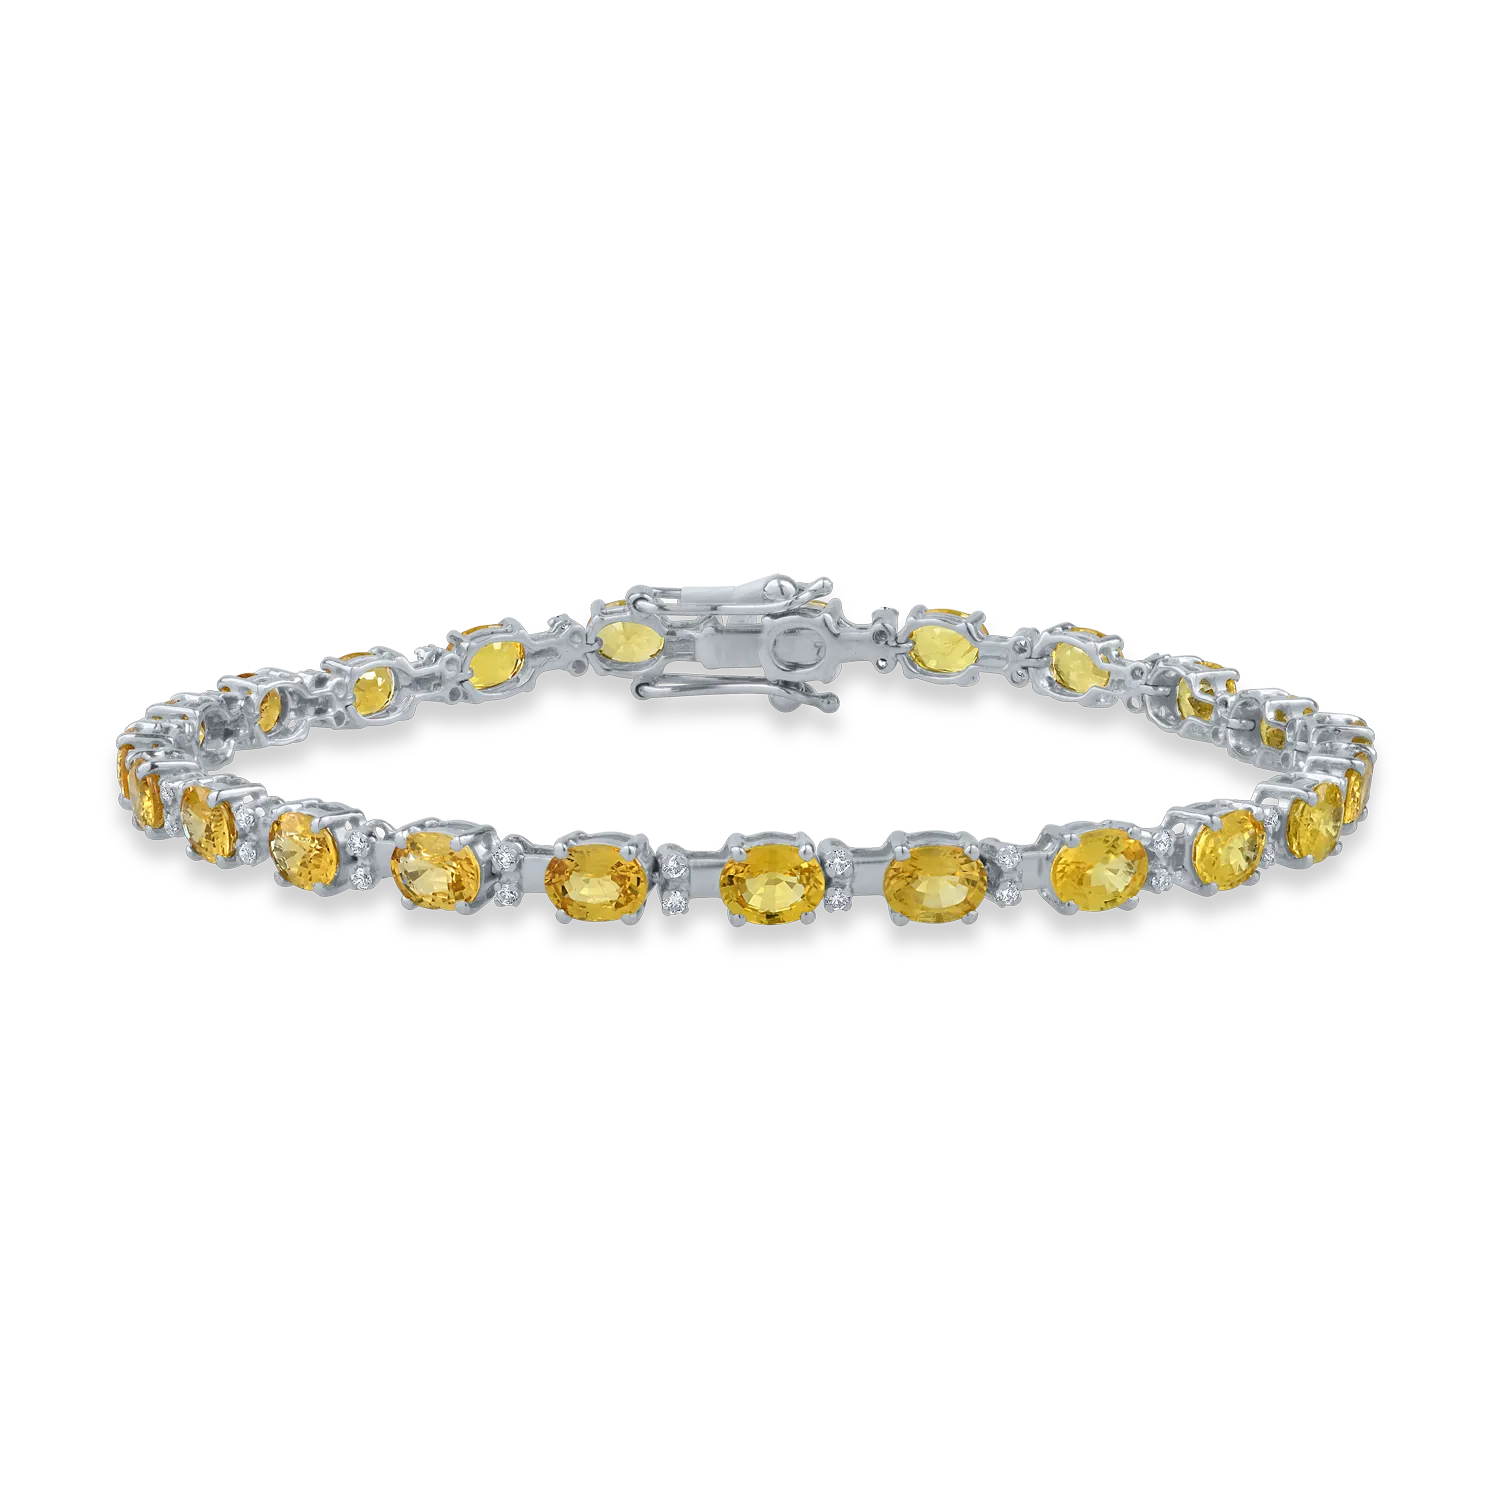 White gold tennis bracelet with 9.58ct yellow sapphires and 0.33ct diamonds